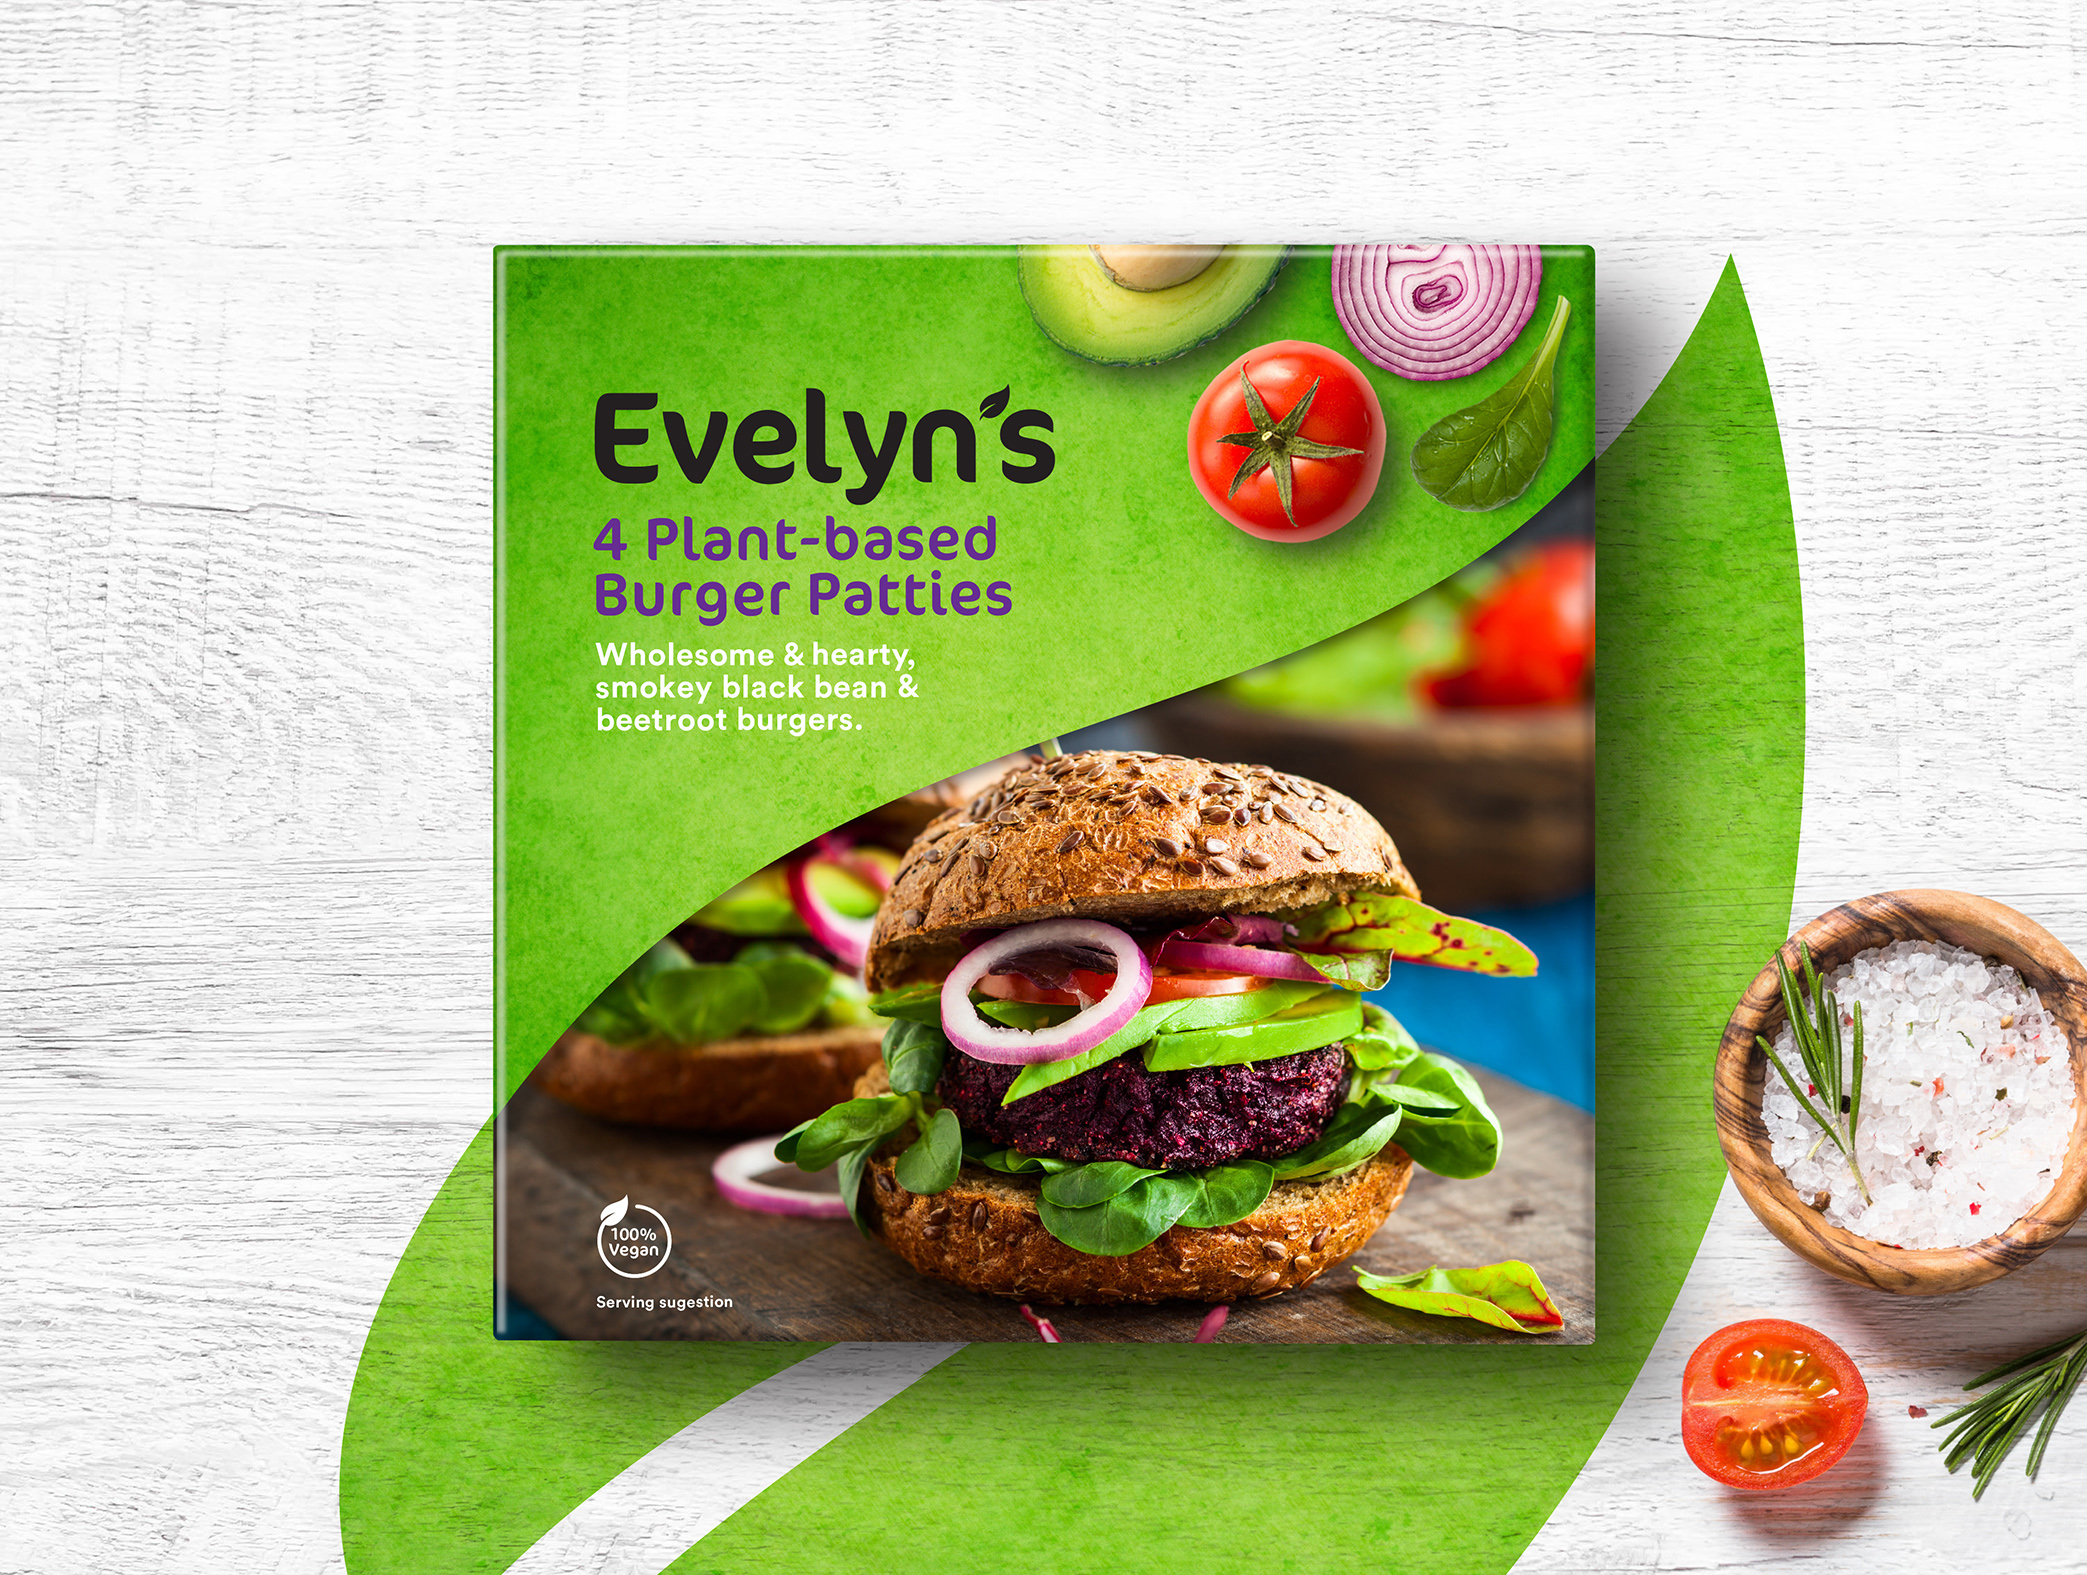 Evelyn’s New Brand and Packaging Designed by Todd Anderson